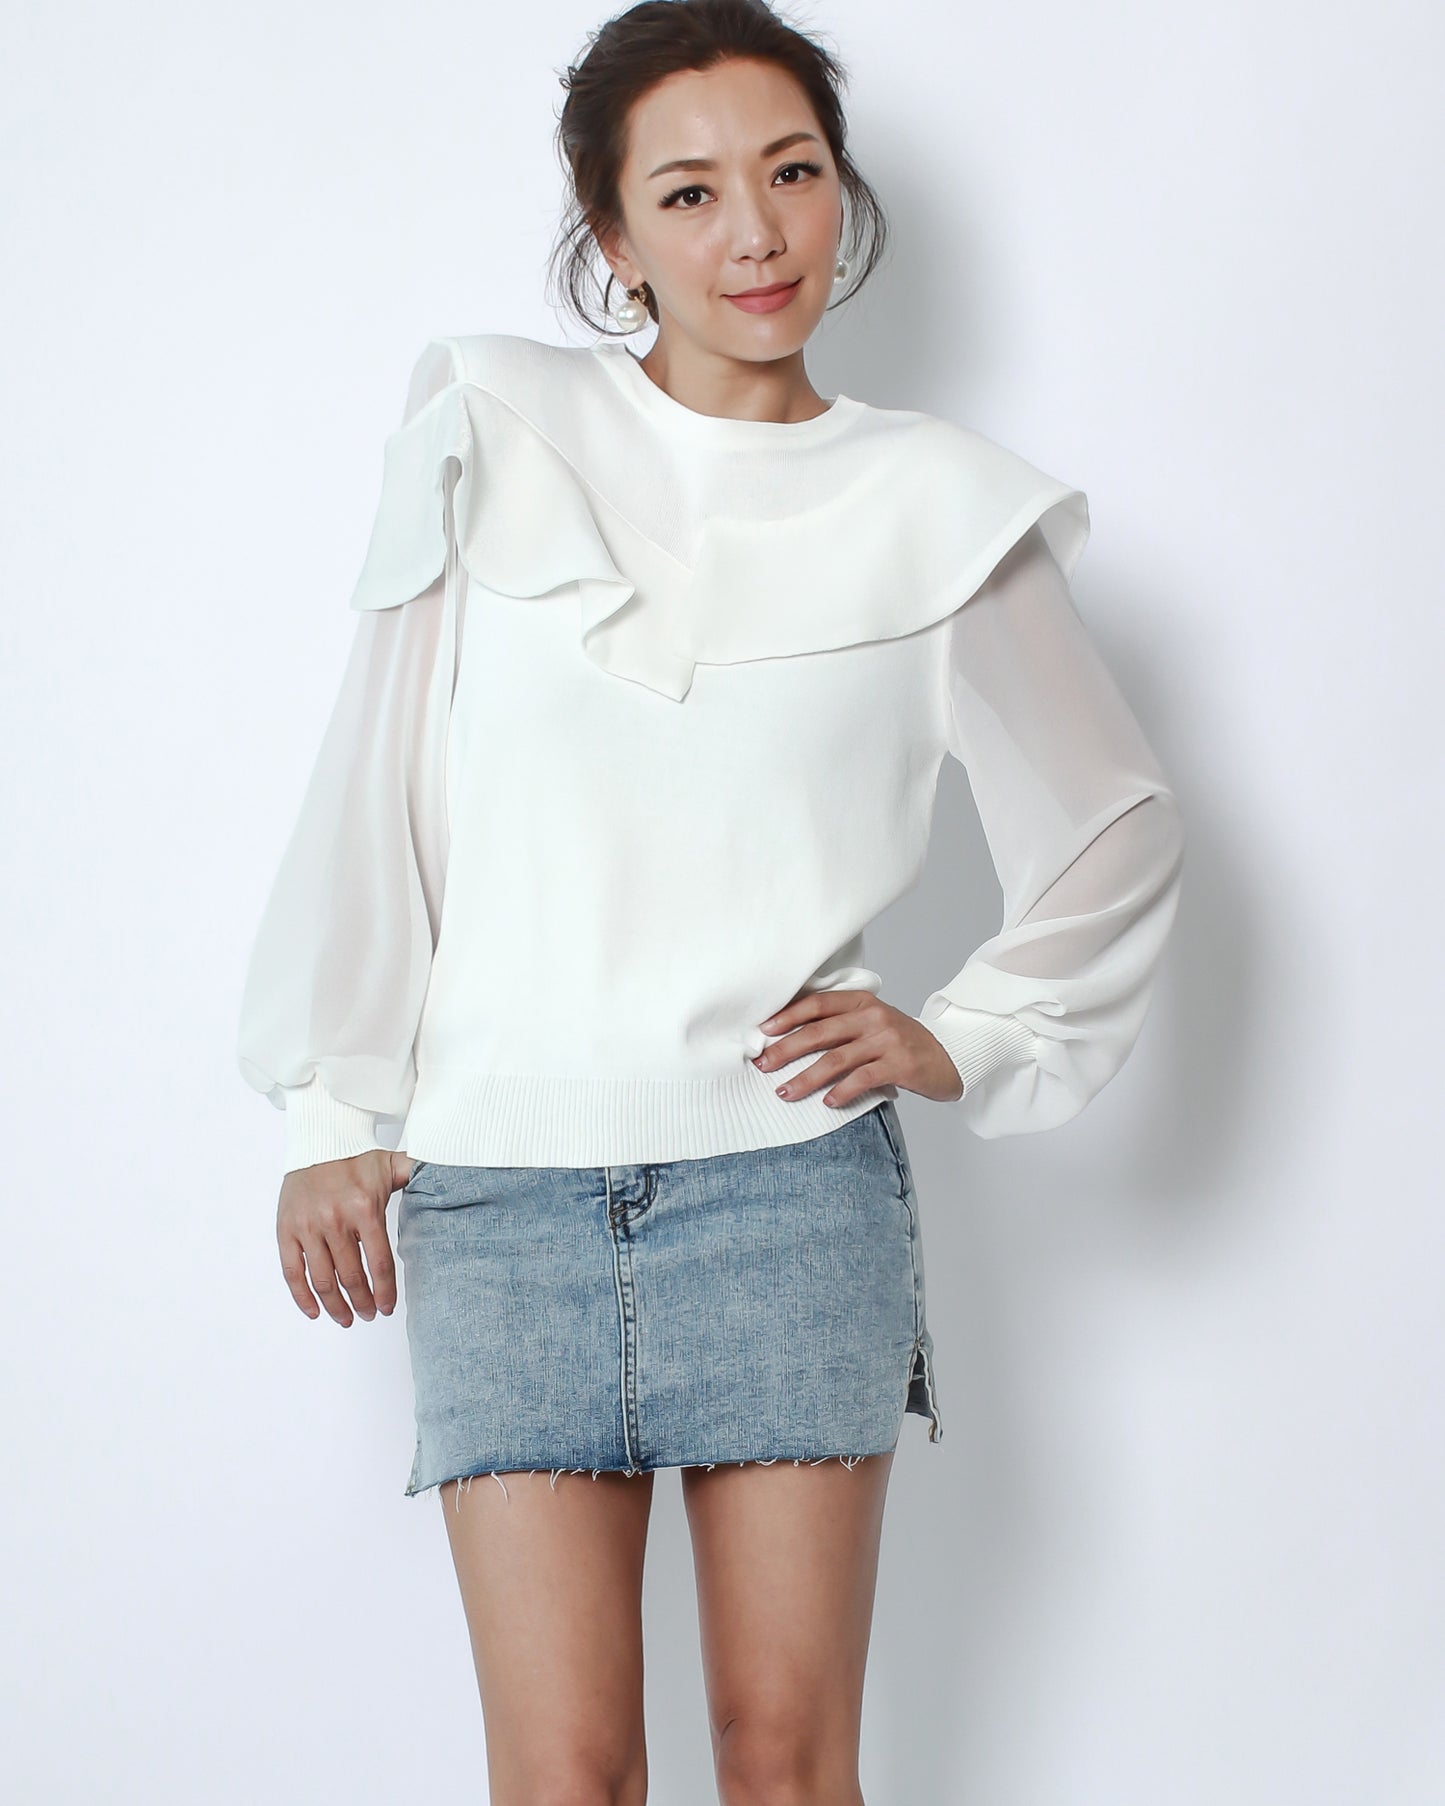 ivory fine knitted with ruffles & chiffon sleeves top *pre-order*